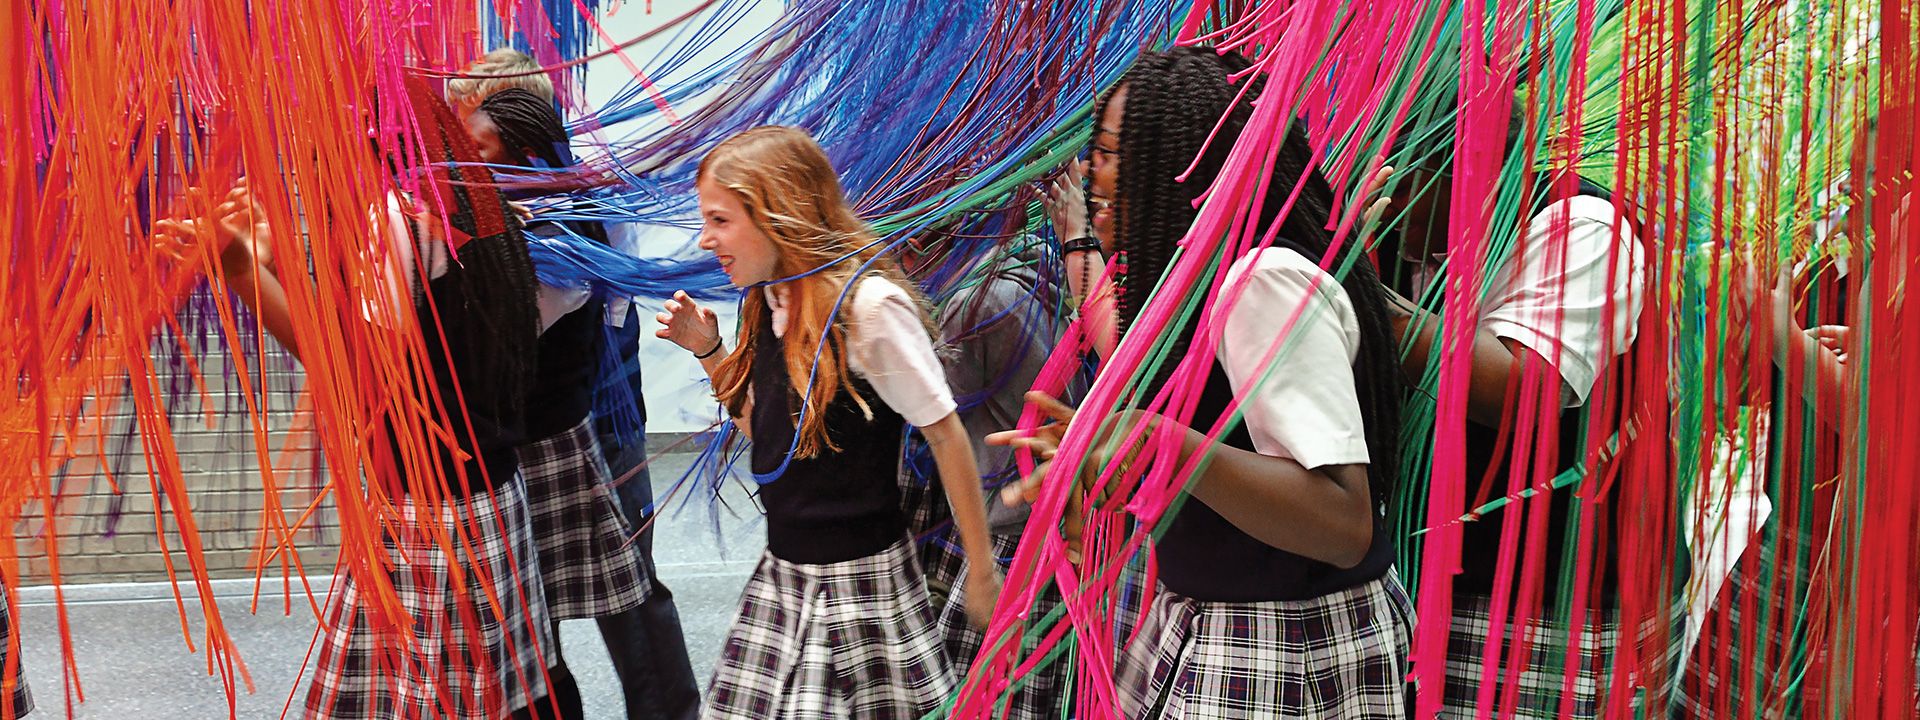 School group interacting with an art installation